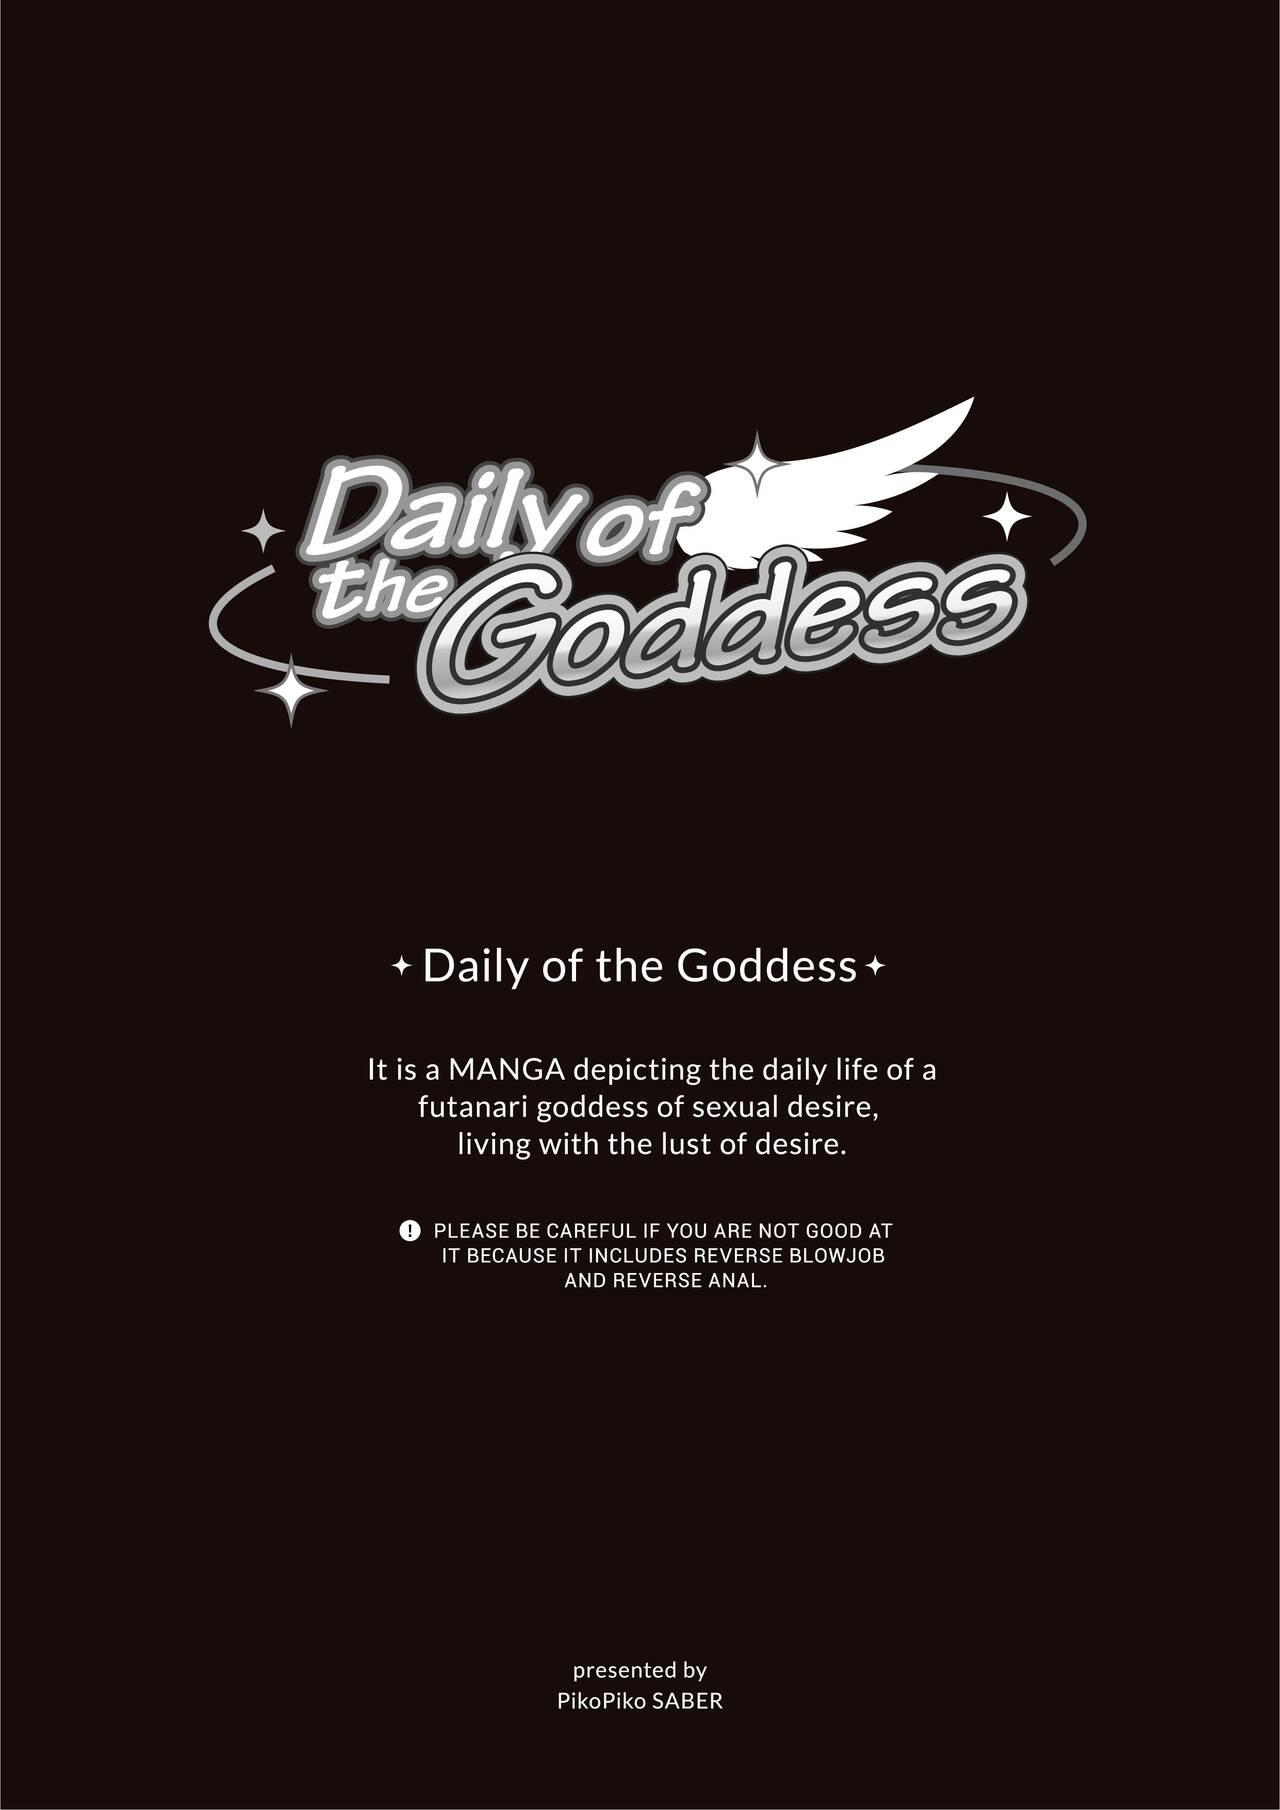 Mms Daily of the Goddess - Original Tit - Page 1